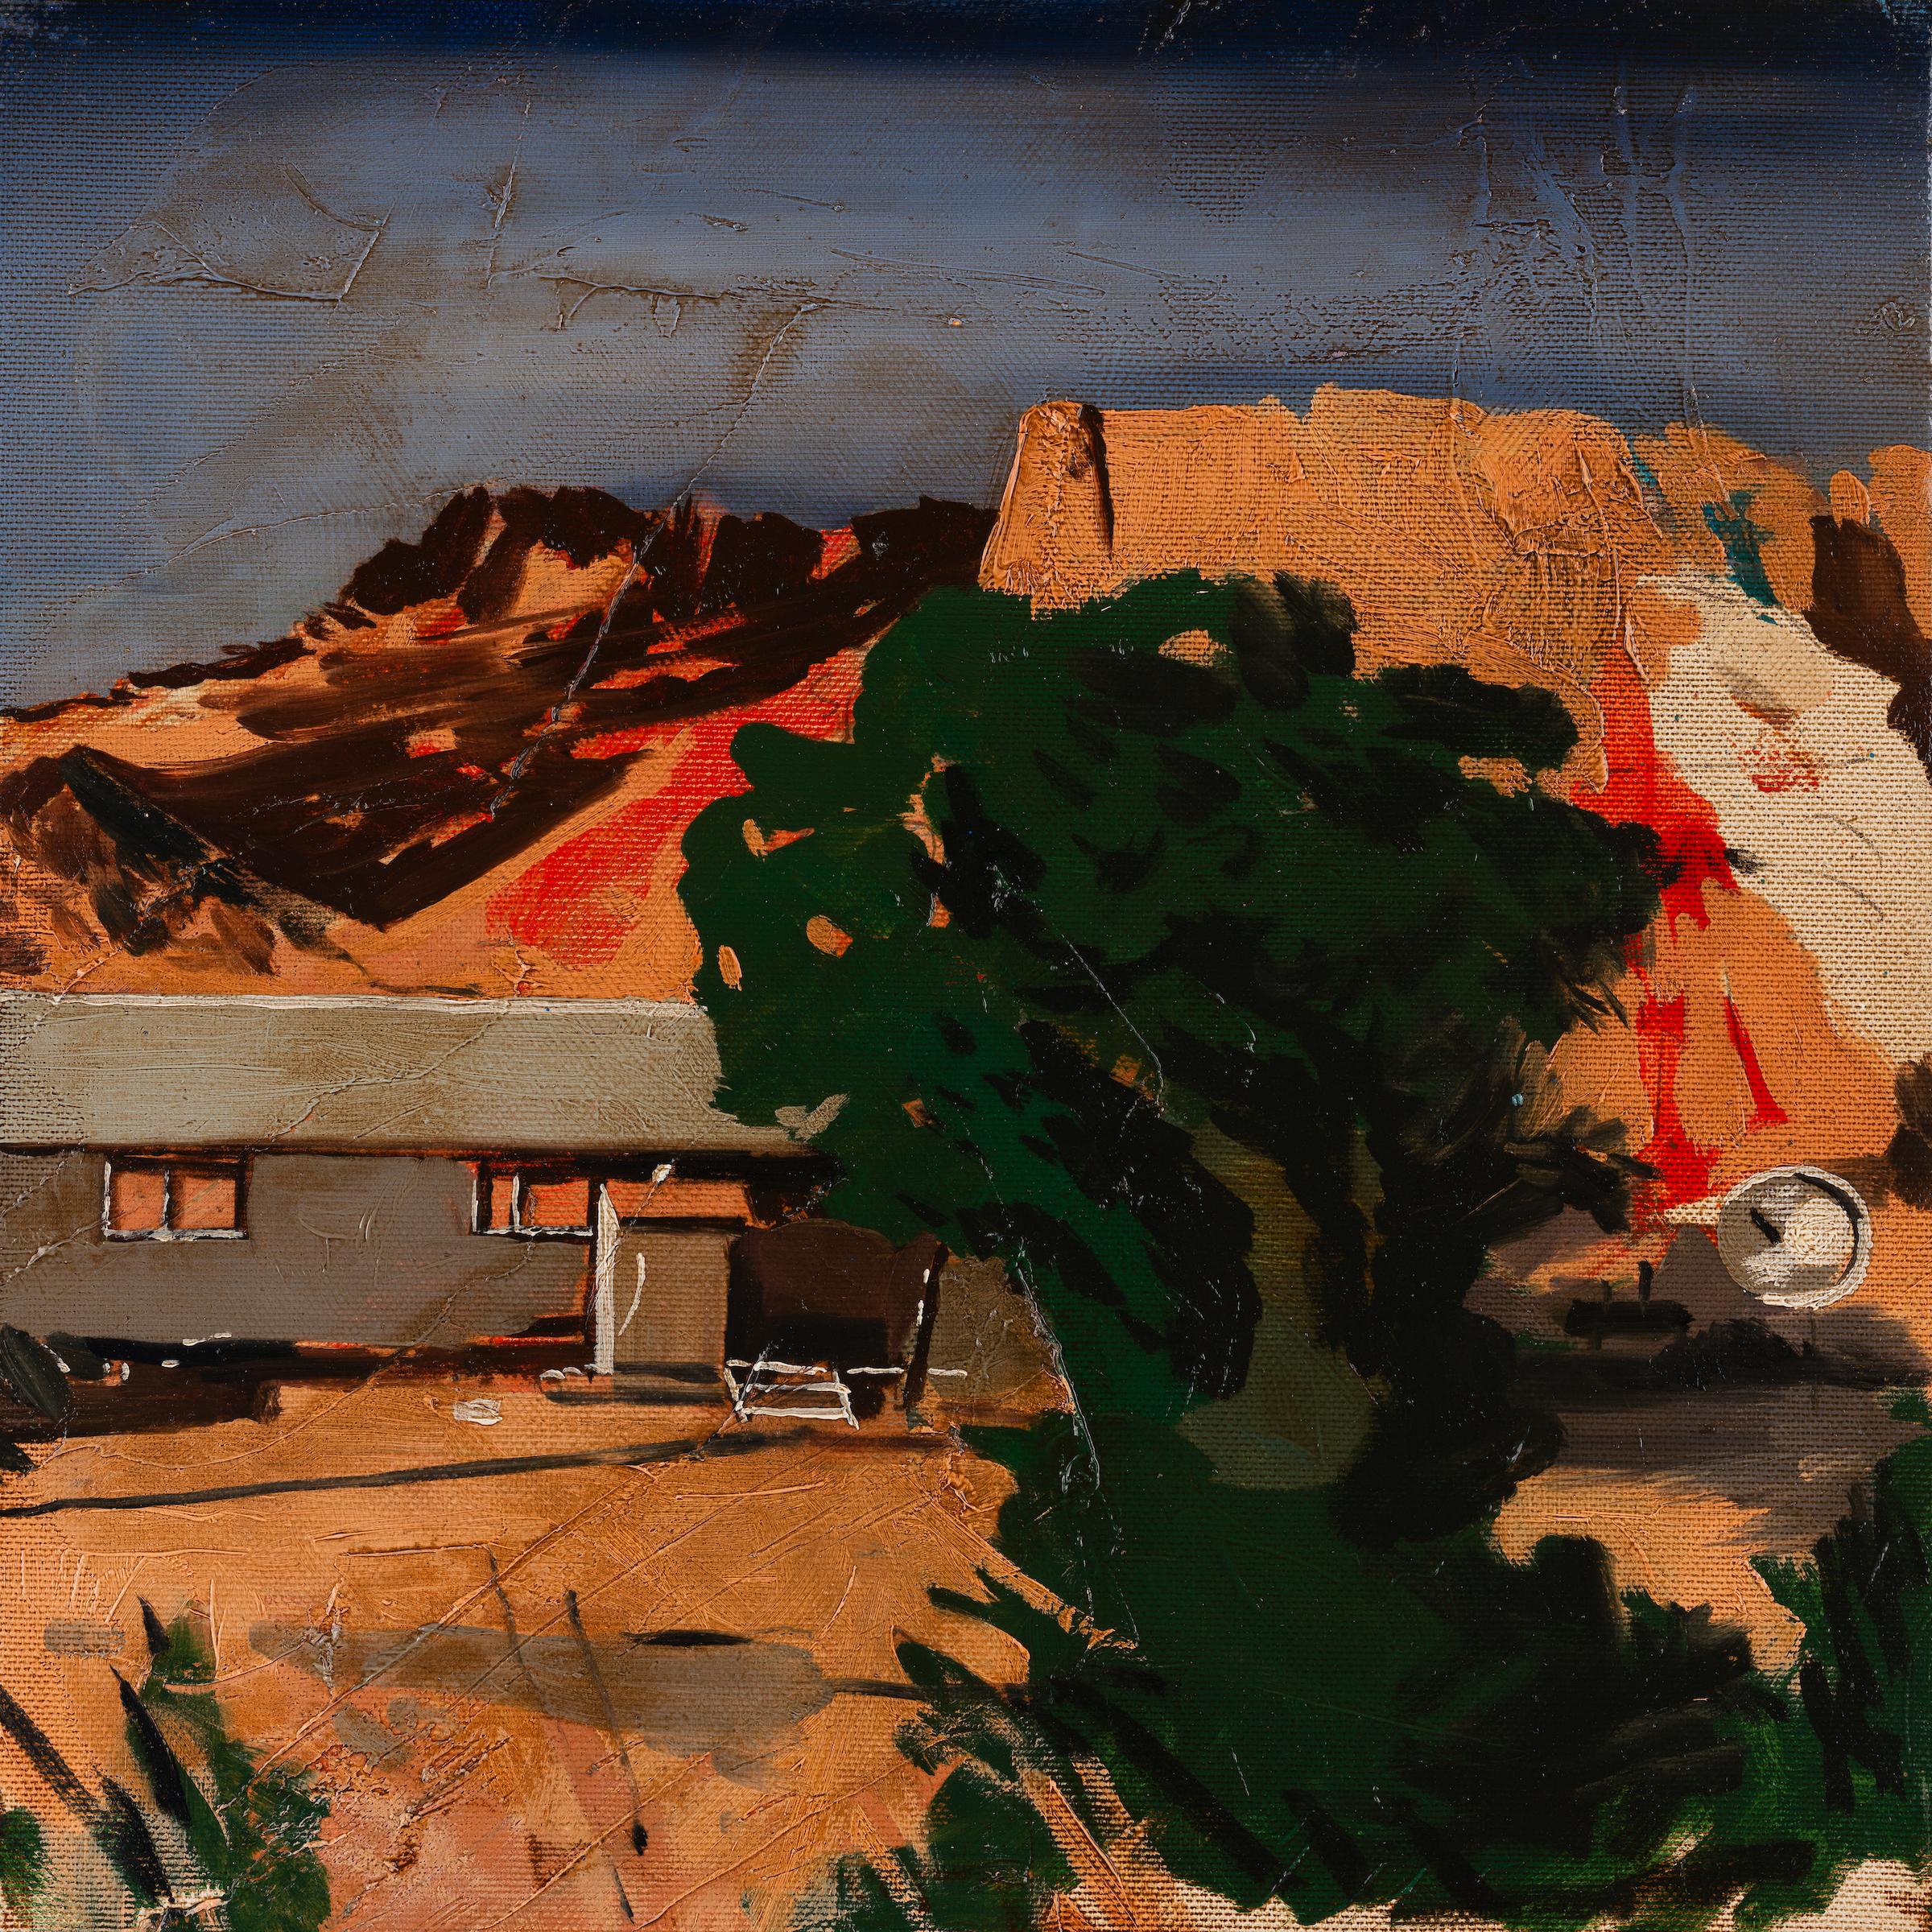 Piotr Szczur Figurative Painting - A NATIVE AMERICAN HOME II -  from the series: MADE IN USA, Expressionism